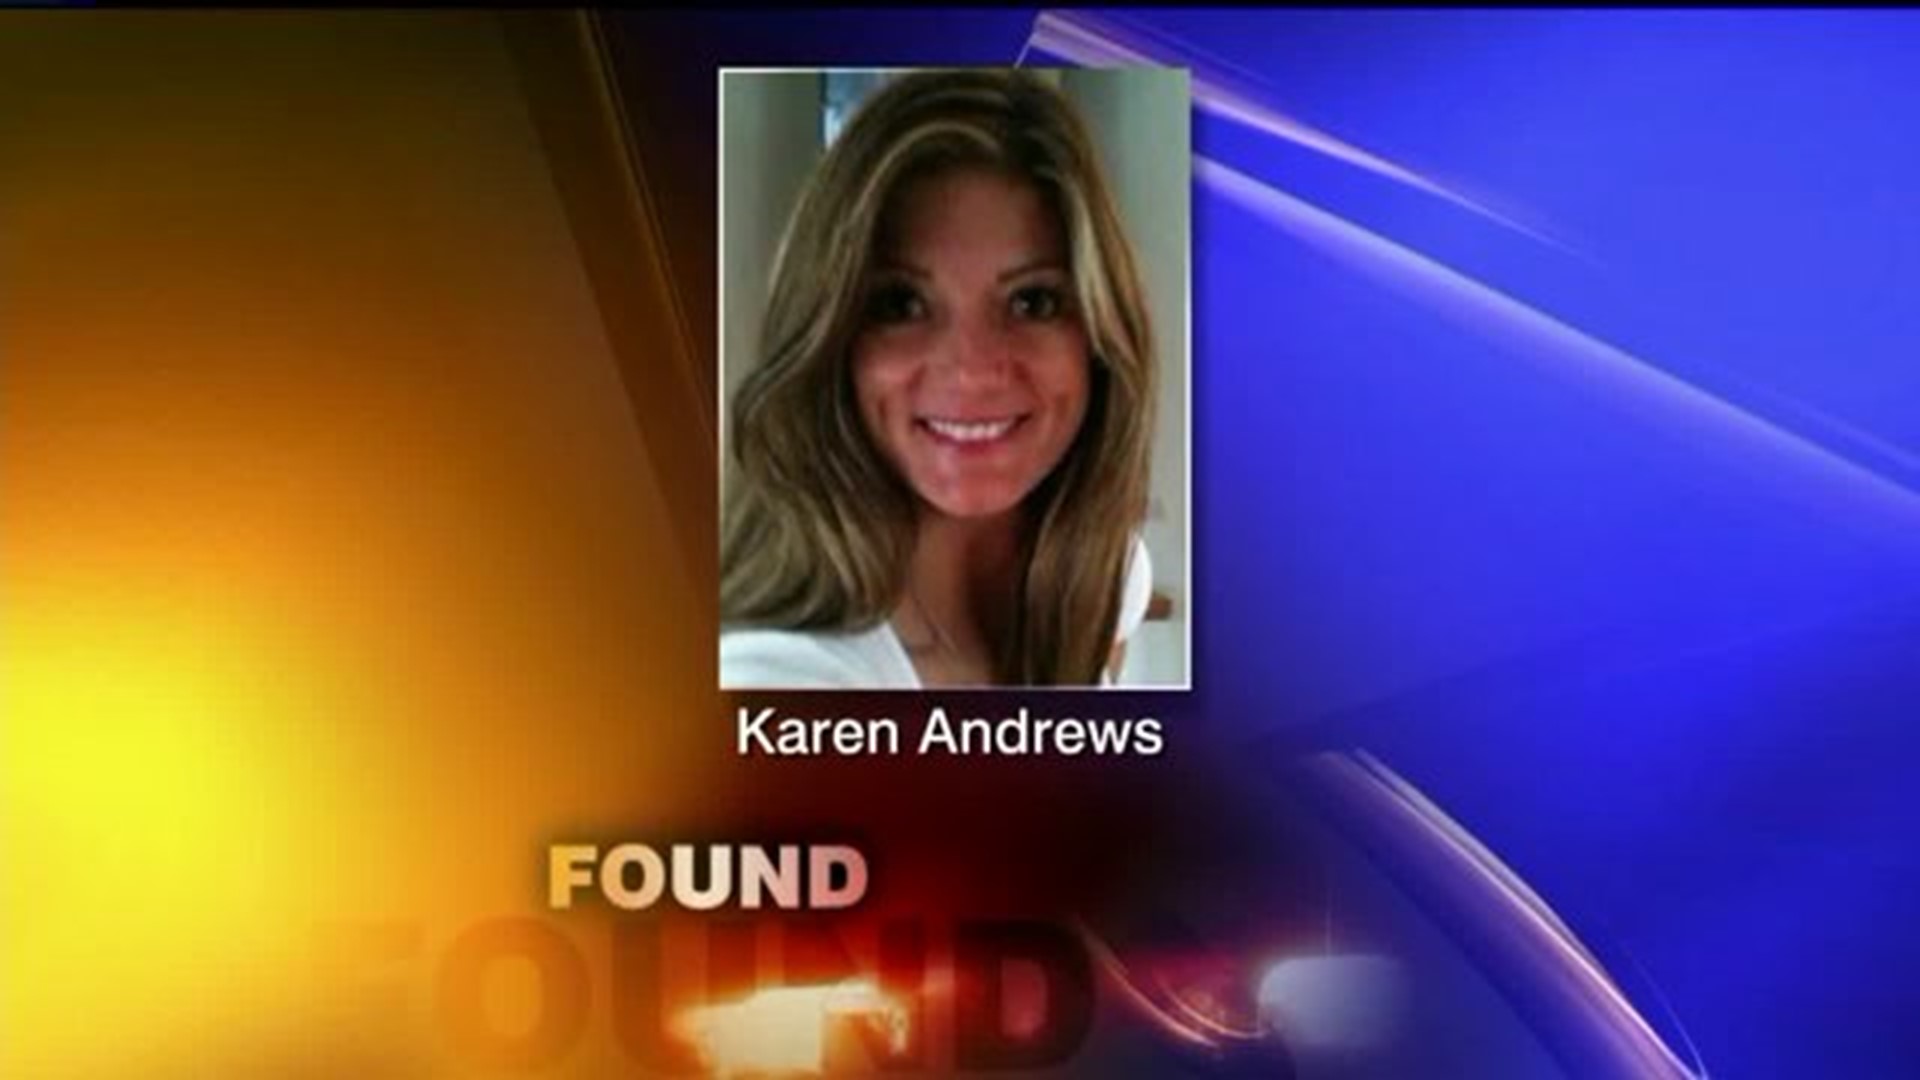 Woman Recovering After Crash, Disappearance